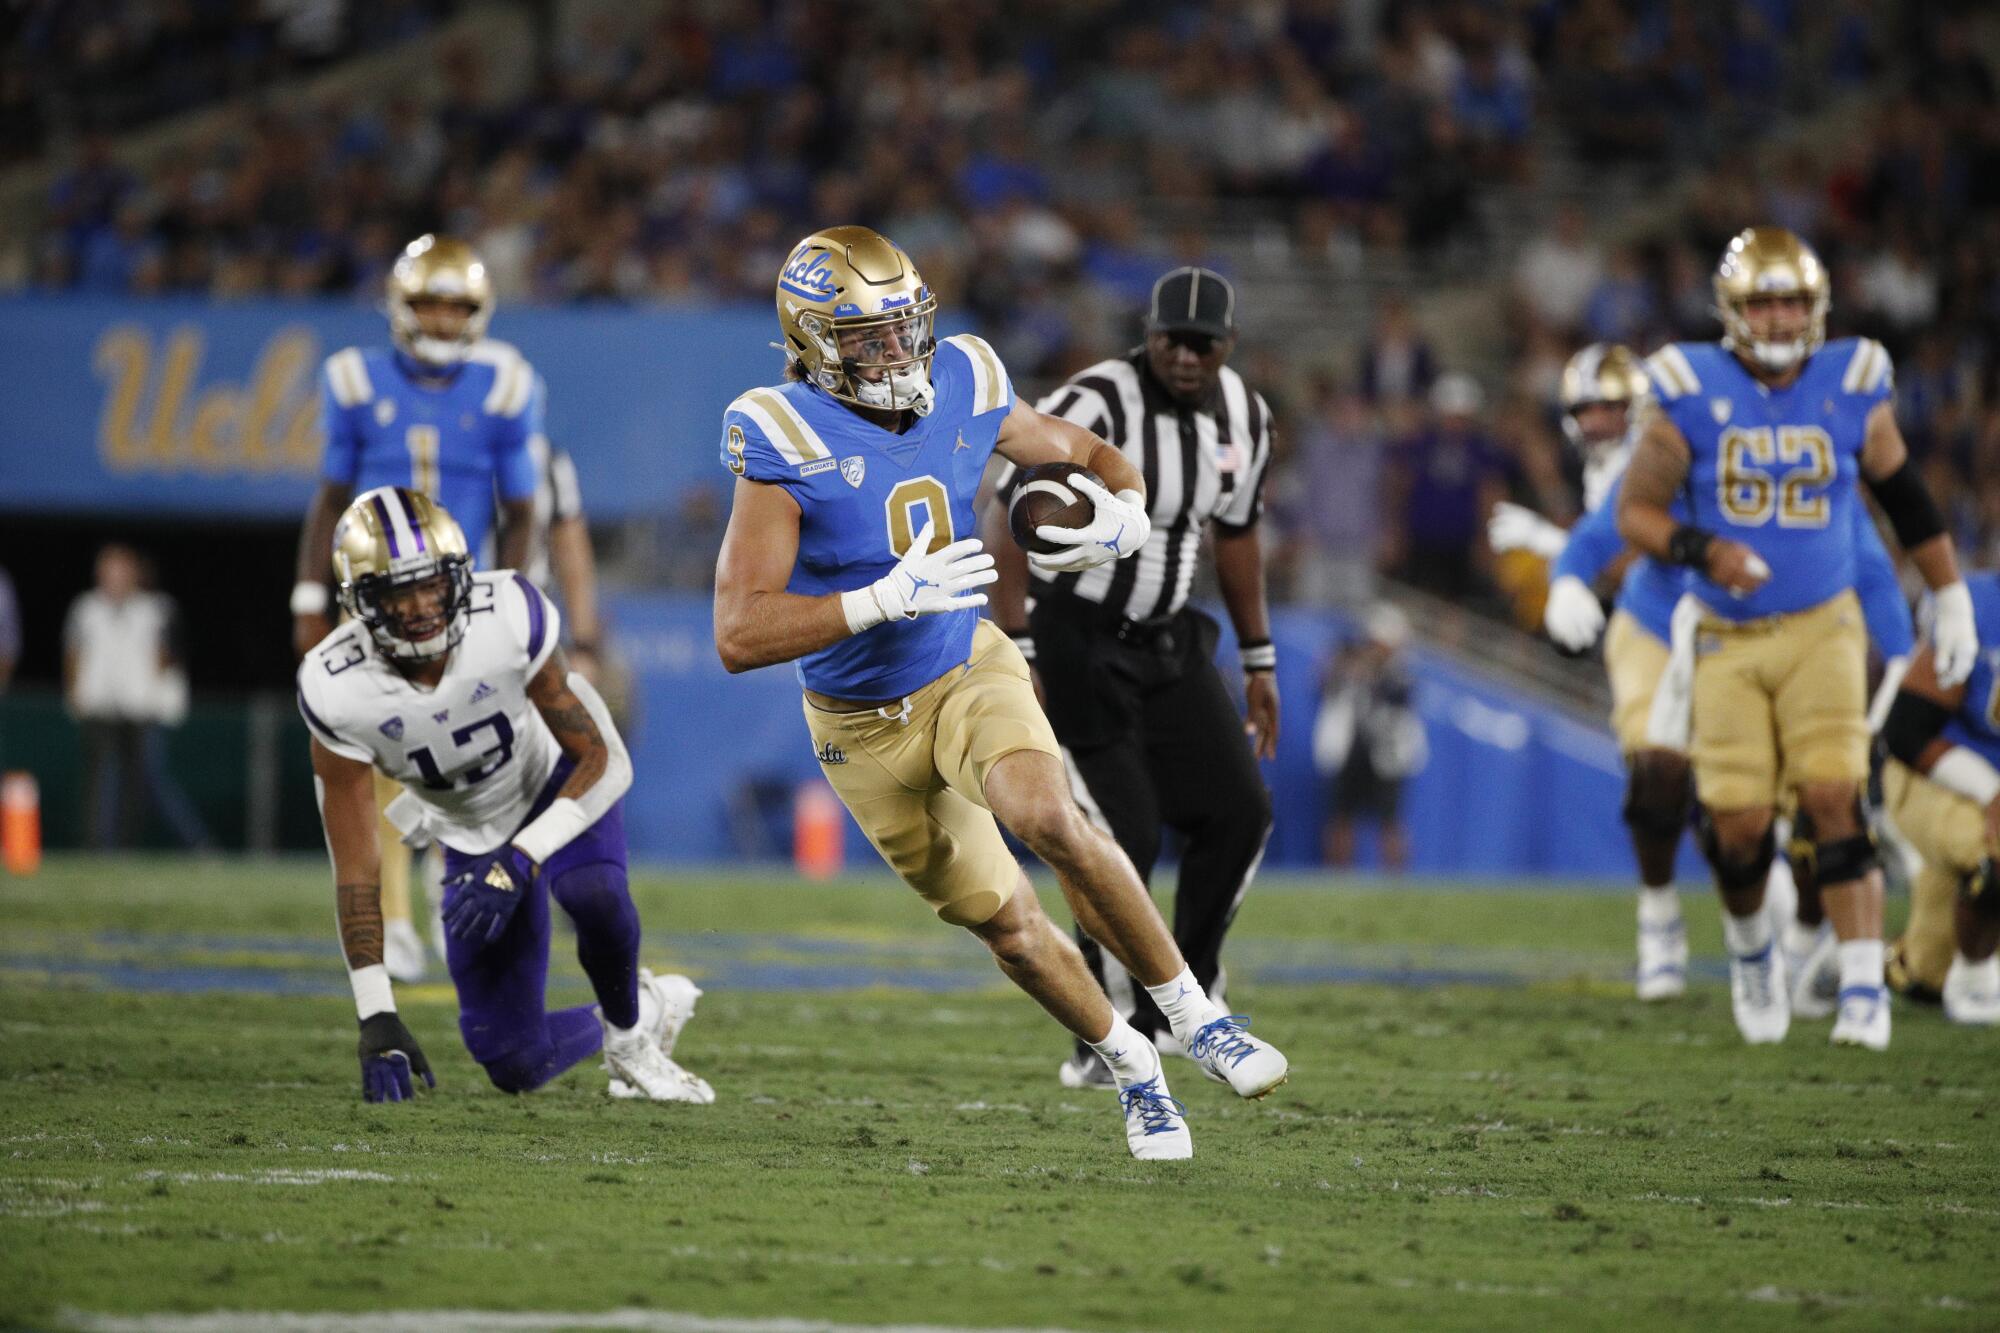 UCLA wide receiver Jake Bobo runs with the ball after making a catch during a win over Washington.